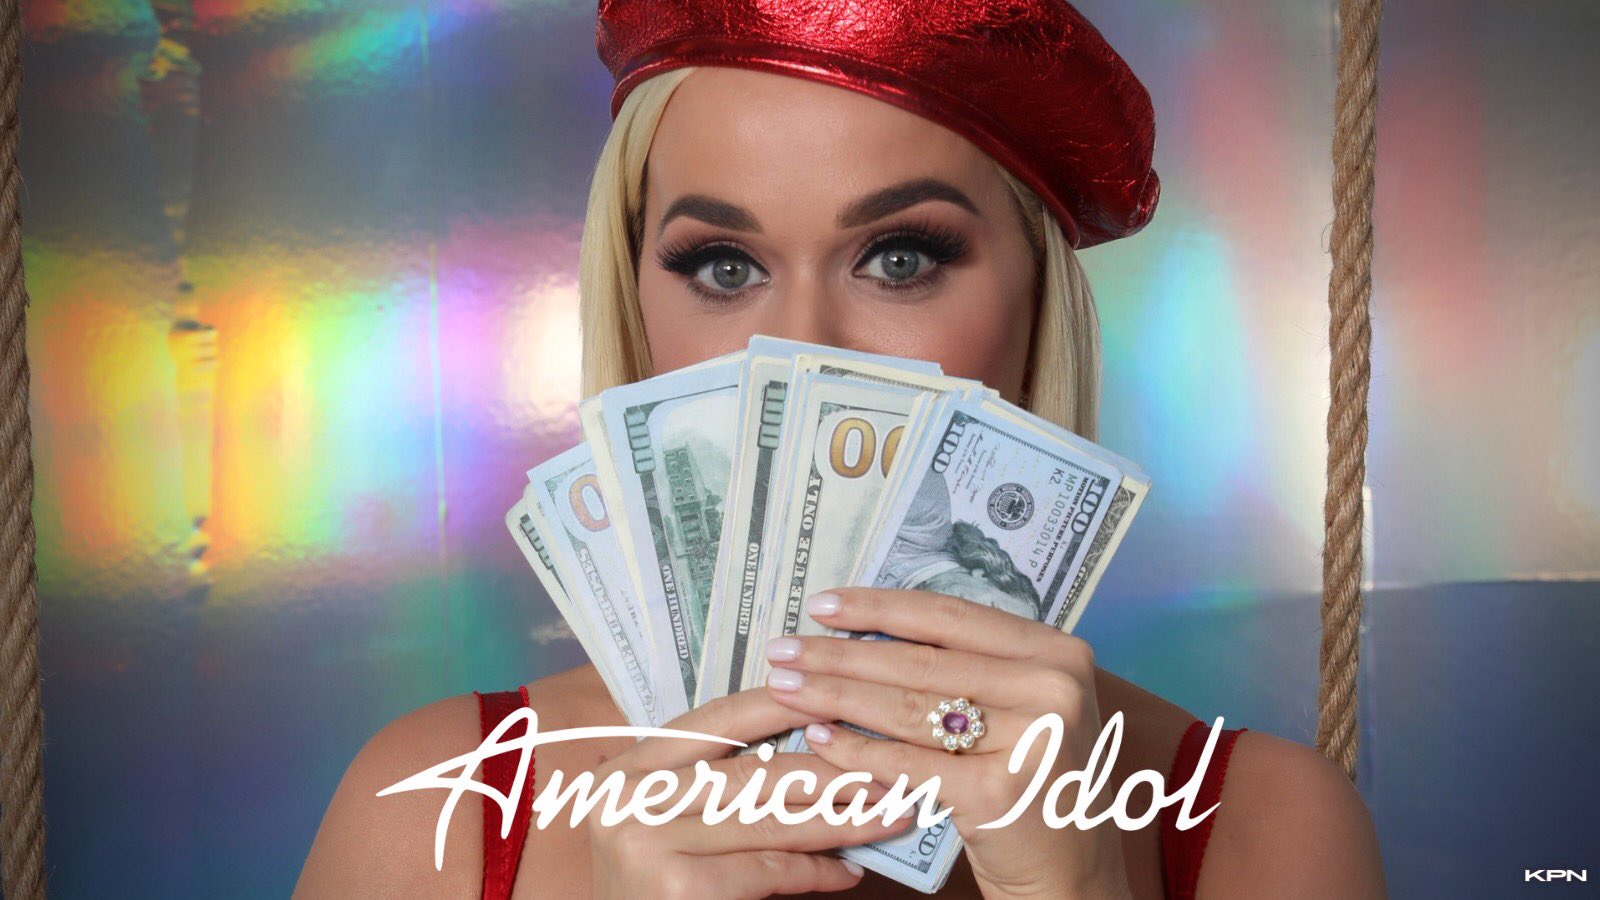 KATY PERRY NEWS on X: "Katy Perry has now earned $125M only from her status  of judge on American Idol. https://t.co/z7kmoorXiL" / X